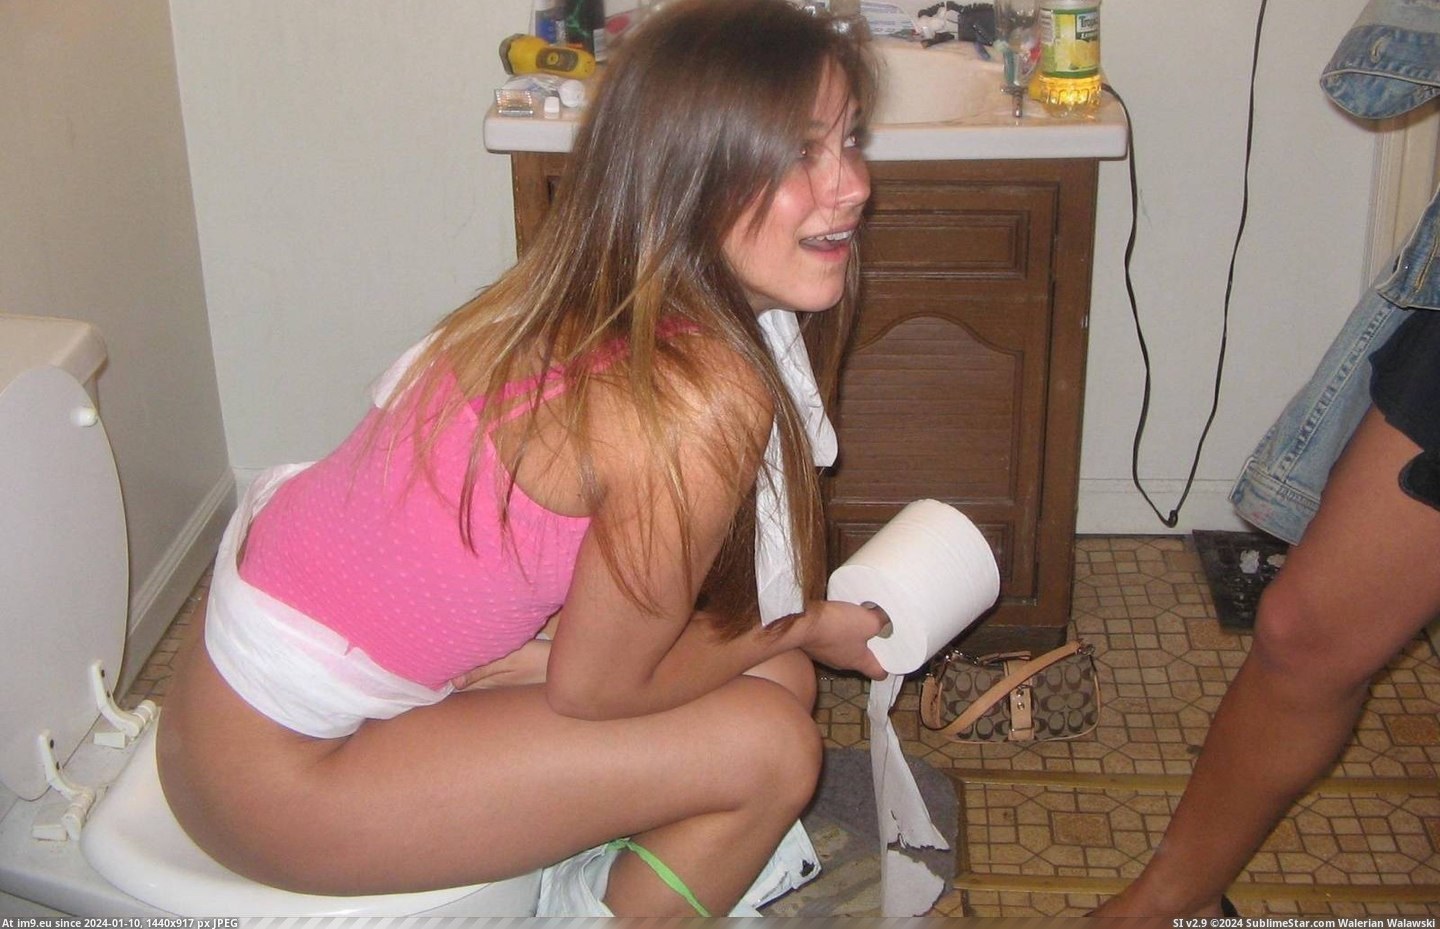 Young Teen Girls Pissing On Toilets 2 (WC toilet bowl peeing porn) (in Teen Girls Pissing Porn (Young Teens Toilet Peeing))